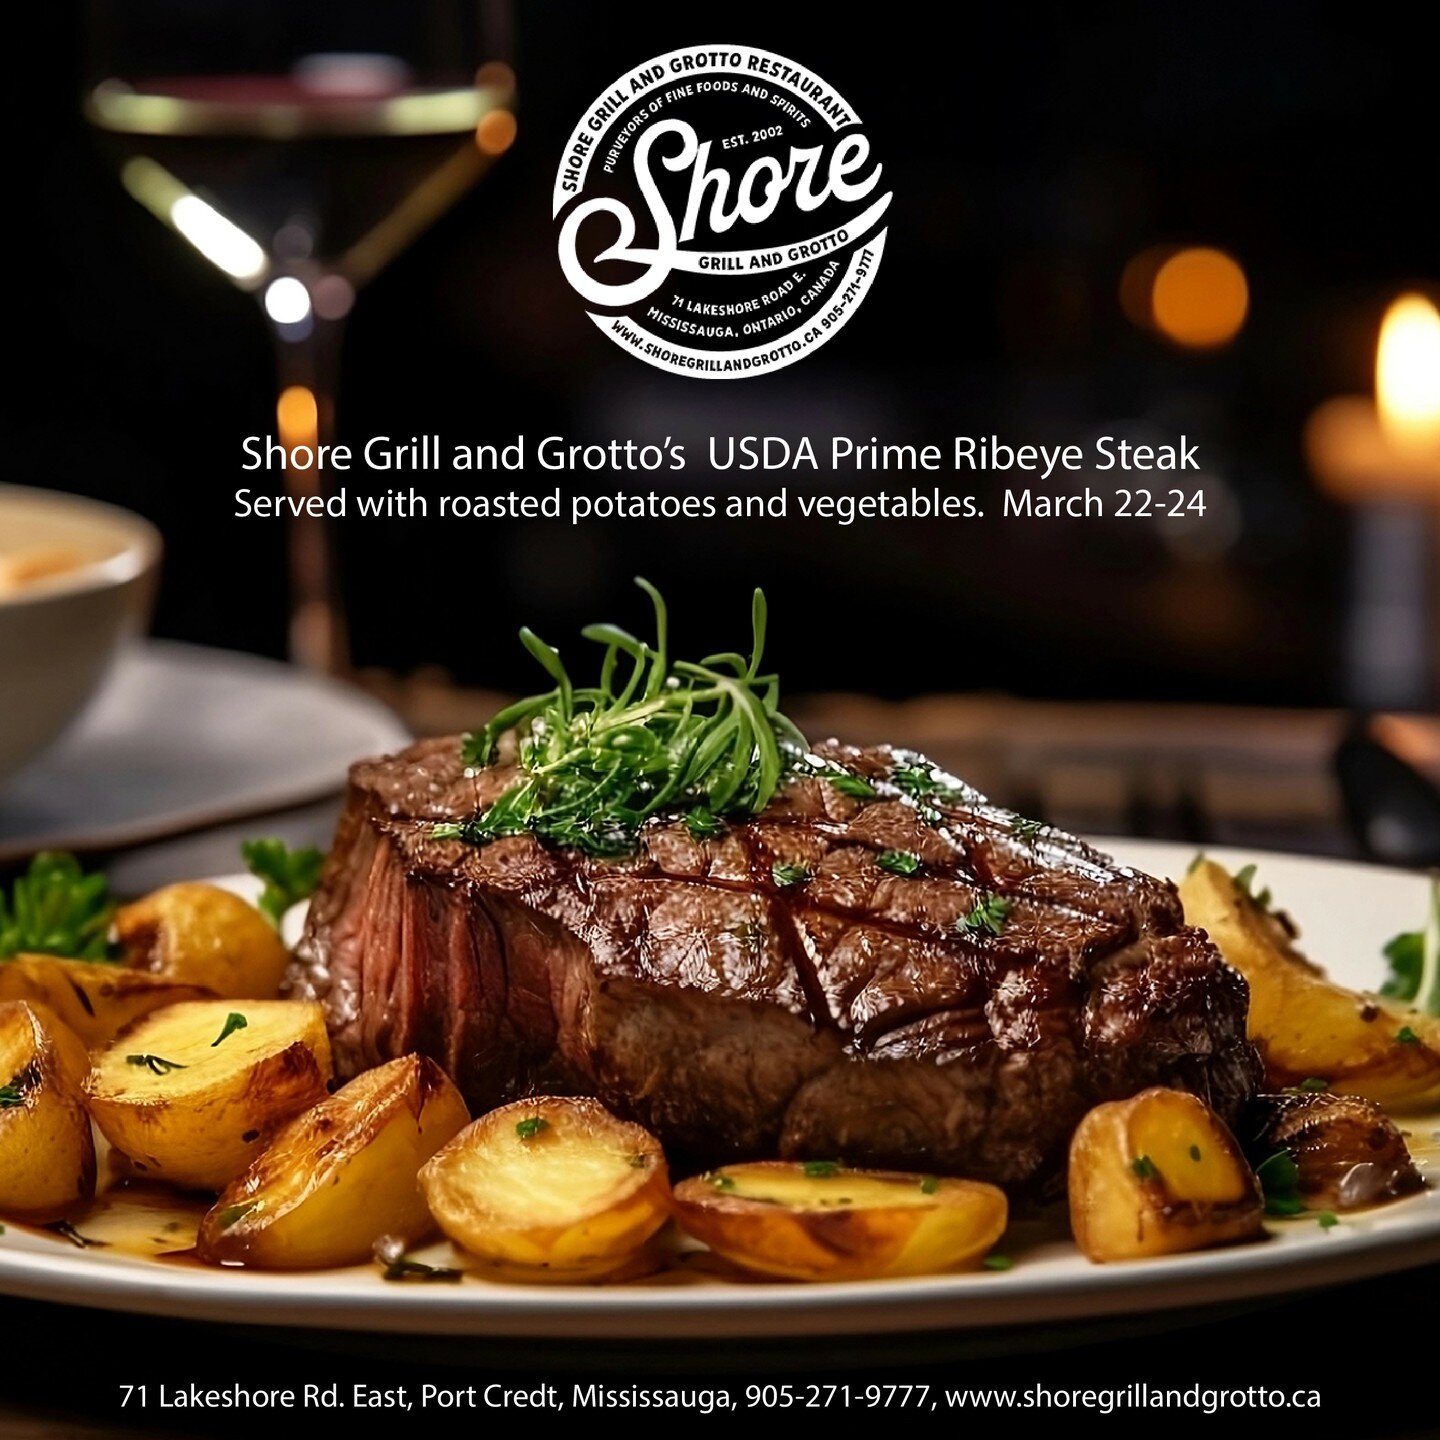 Treat yourself to a mouthwatering USDA prime ribeye steak, grilled to perfection just the way you like it. Served with savory roasted potatoes and crisp, flavorful vegetables, it's a feast fit for a king or queen!